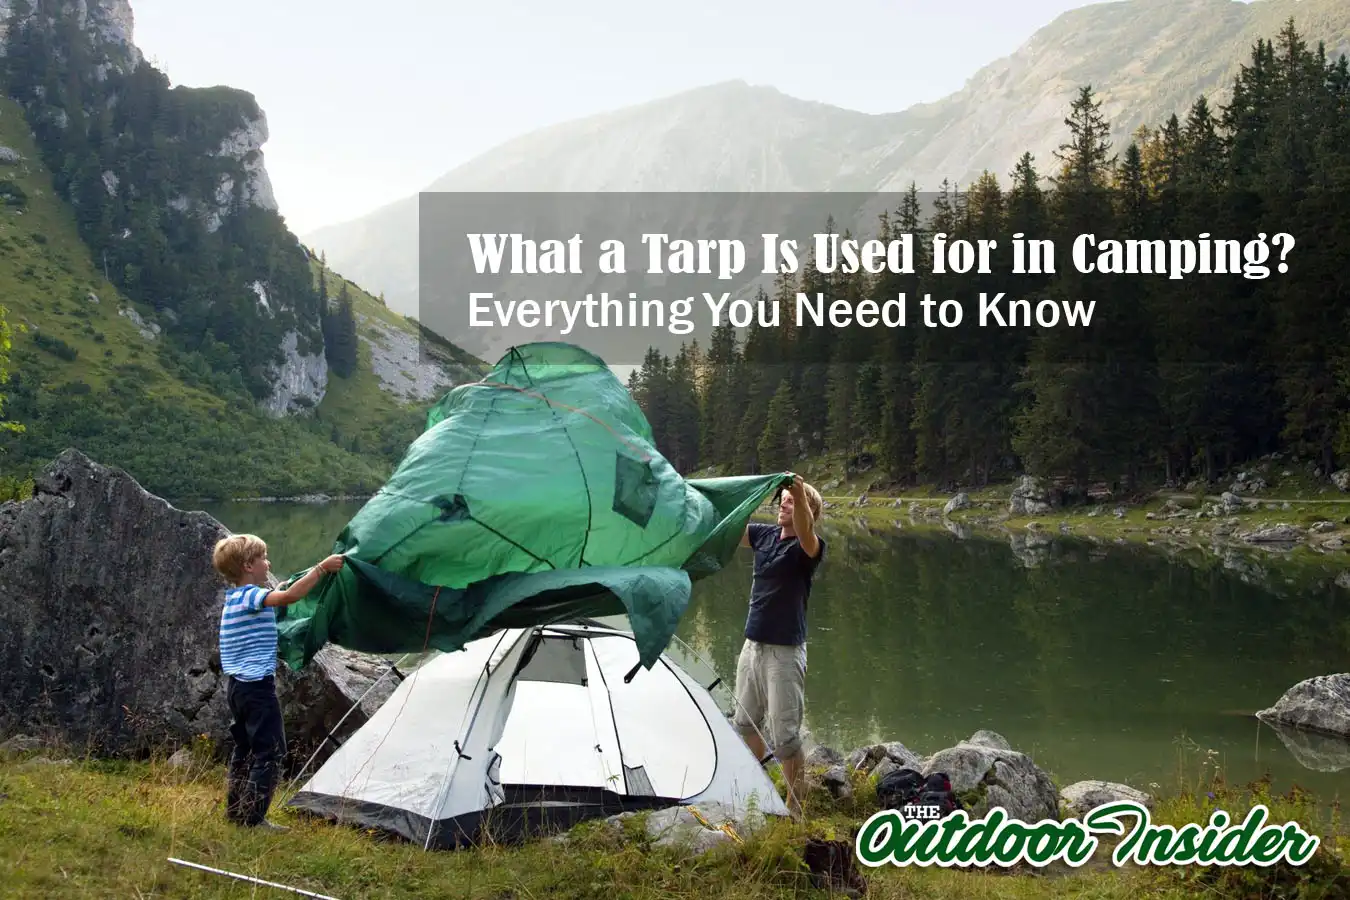 What a Tarp Is Used for in Camping: Everything You Need to Know